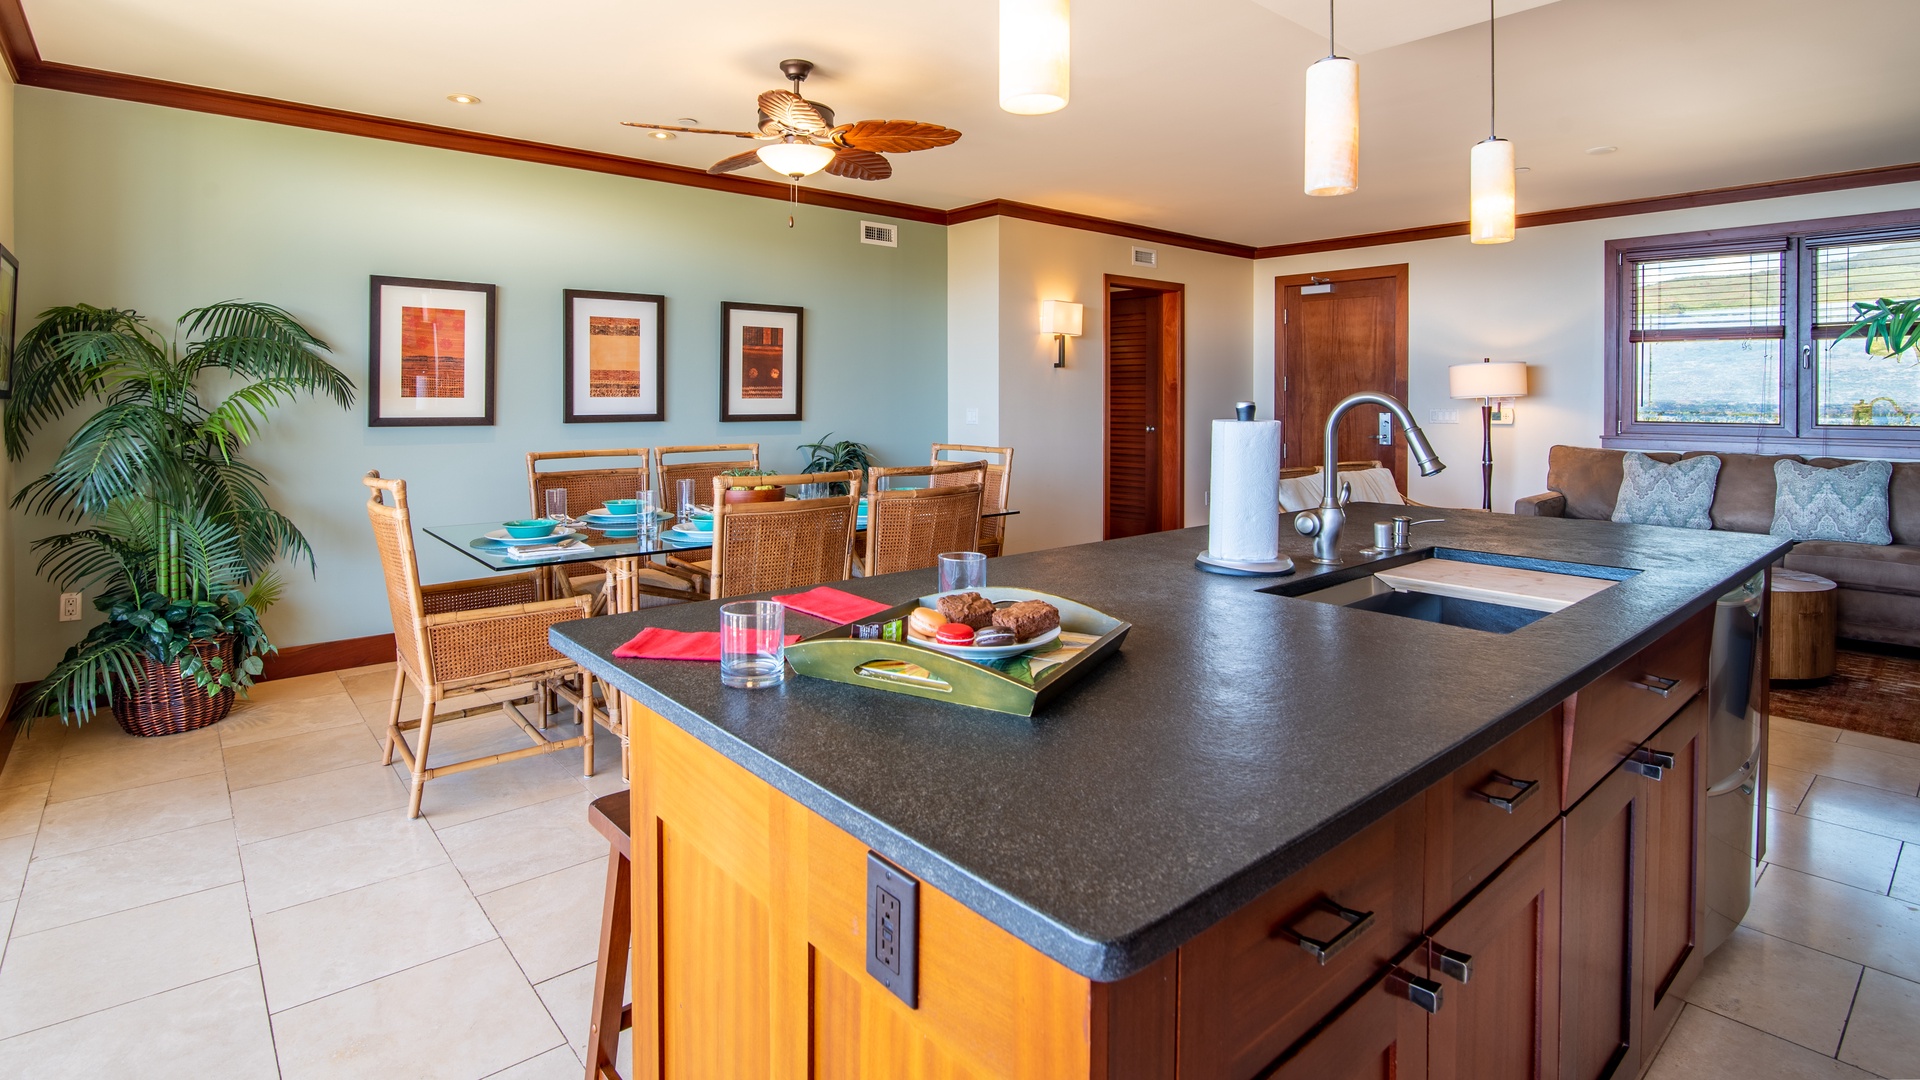 Kapolei Vacation Rentals, Ko Olina Beach Villas B901 - The kitchen island makes for an easy space for entertaining guests.